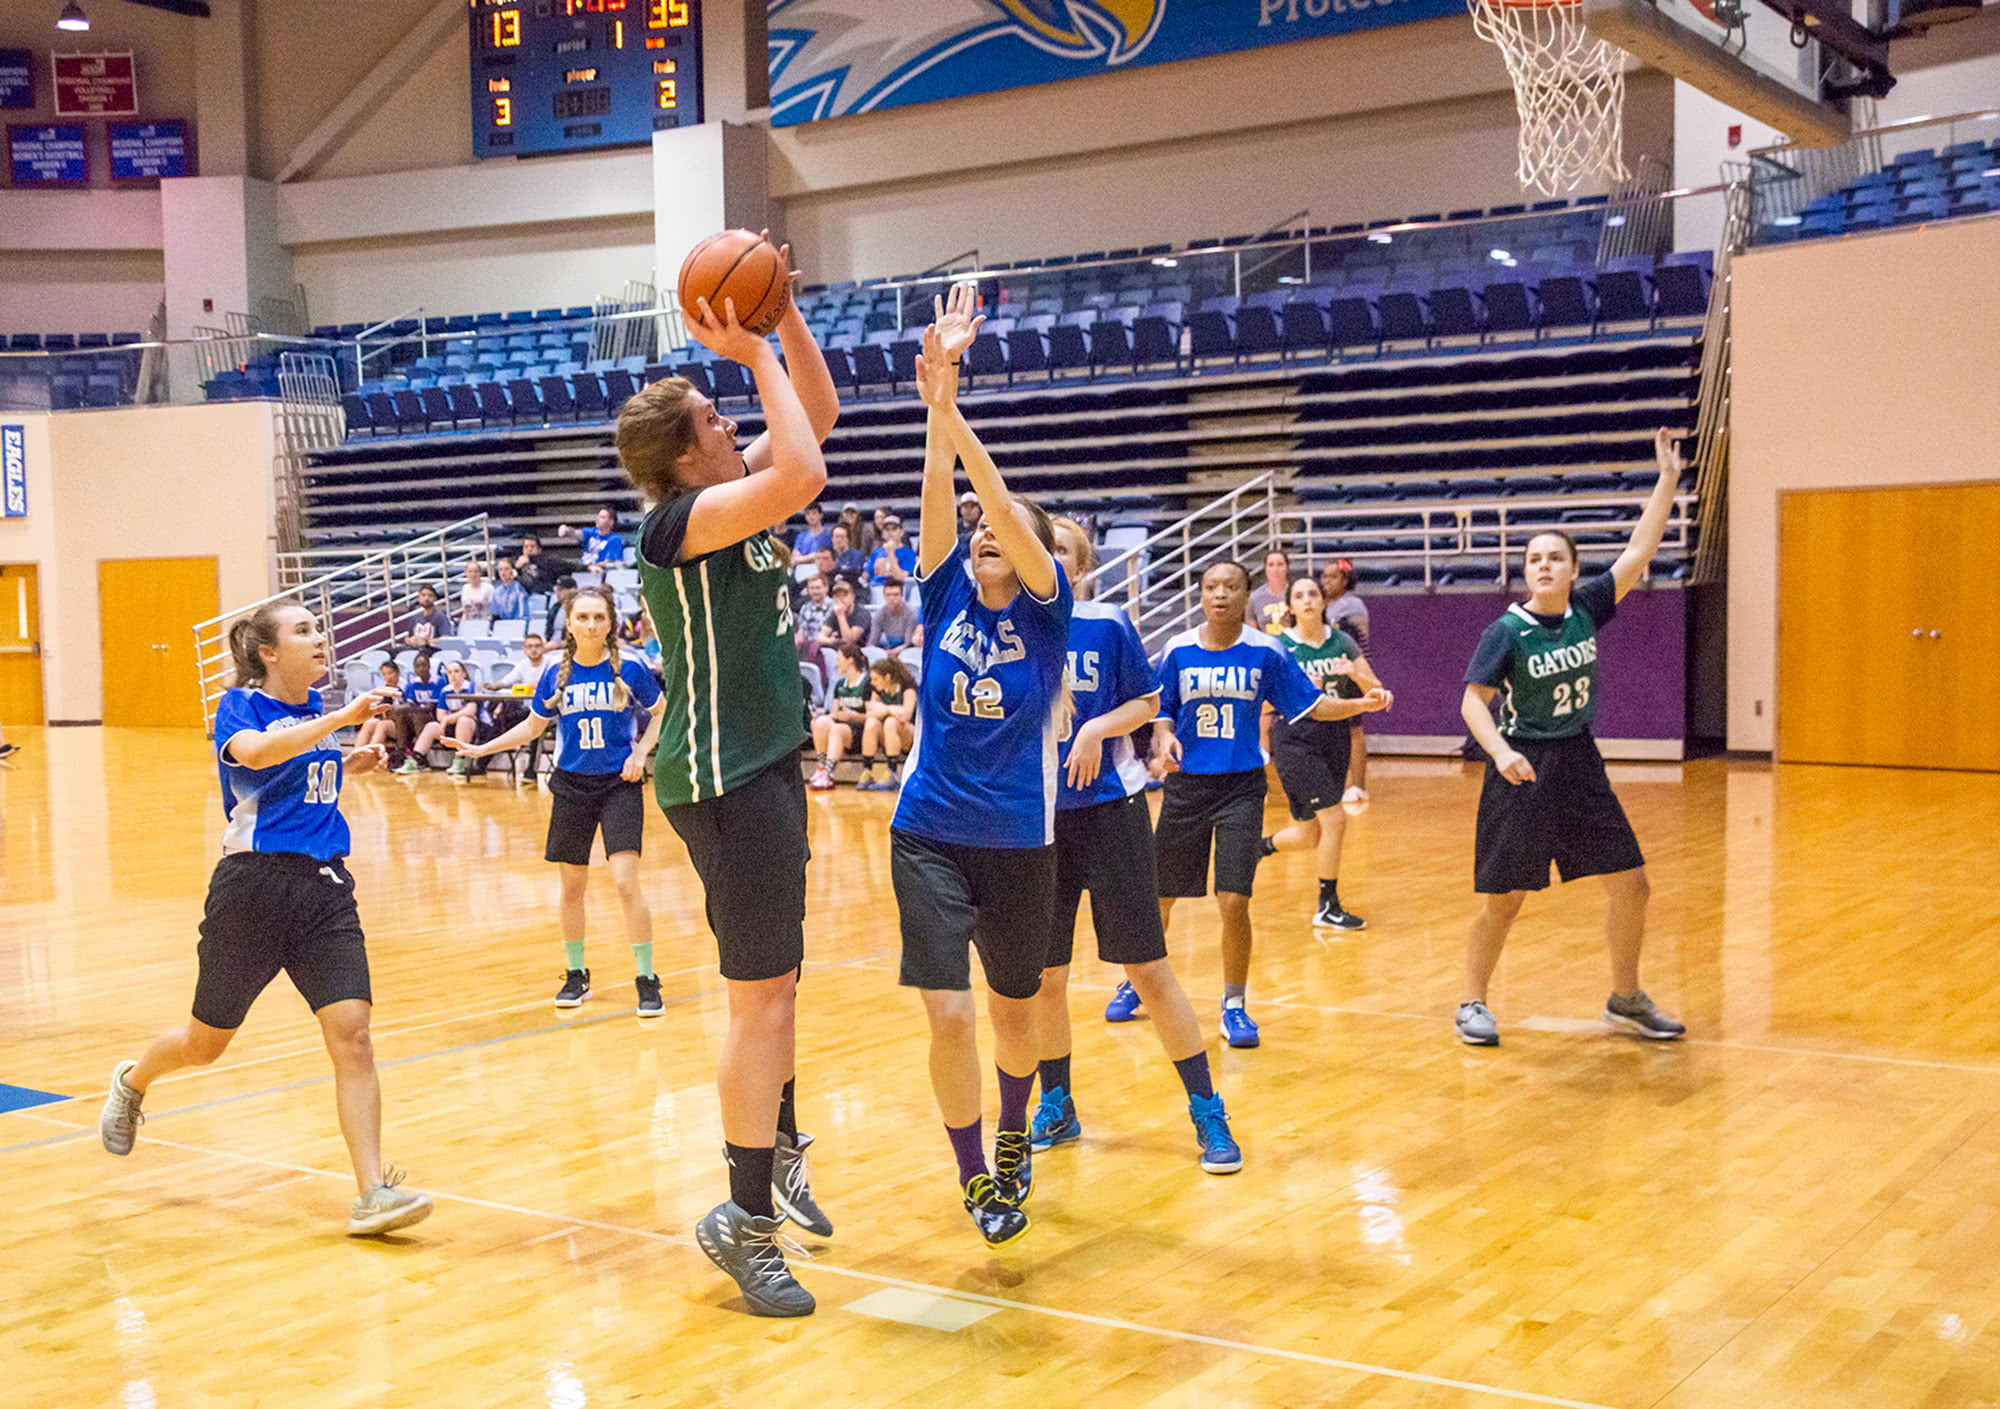 Women's collegian basketball player aiming the basketball while another player attempts to block her. 